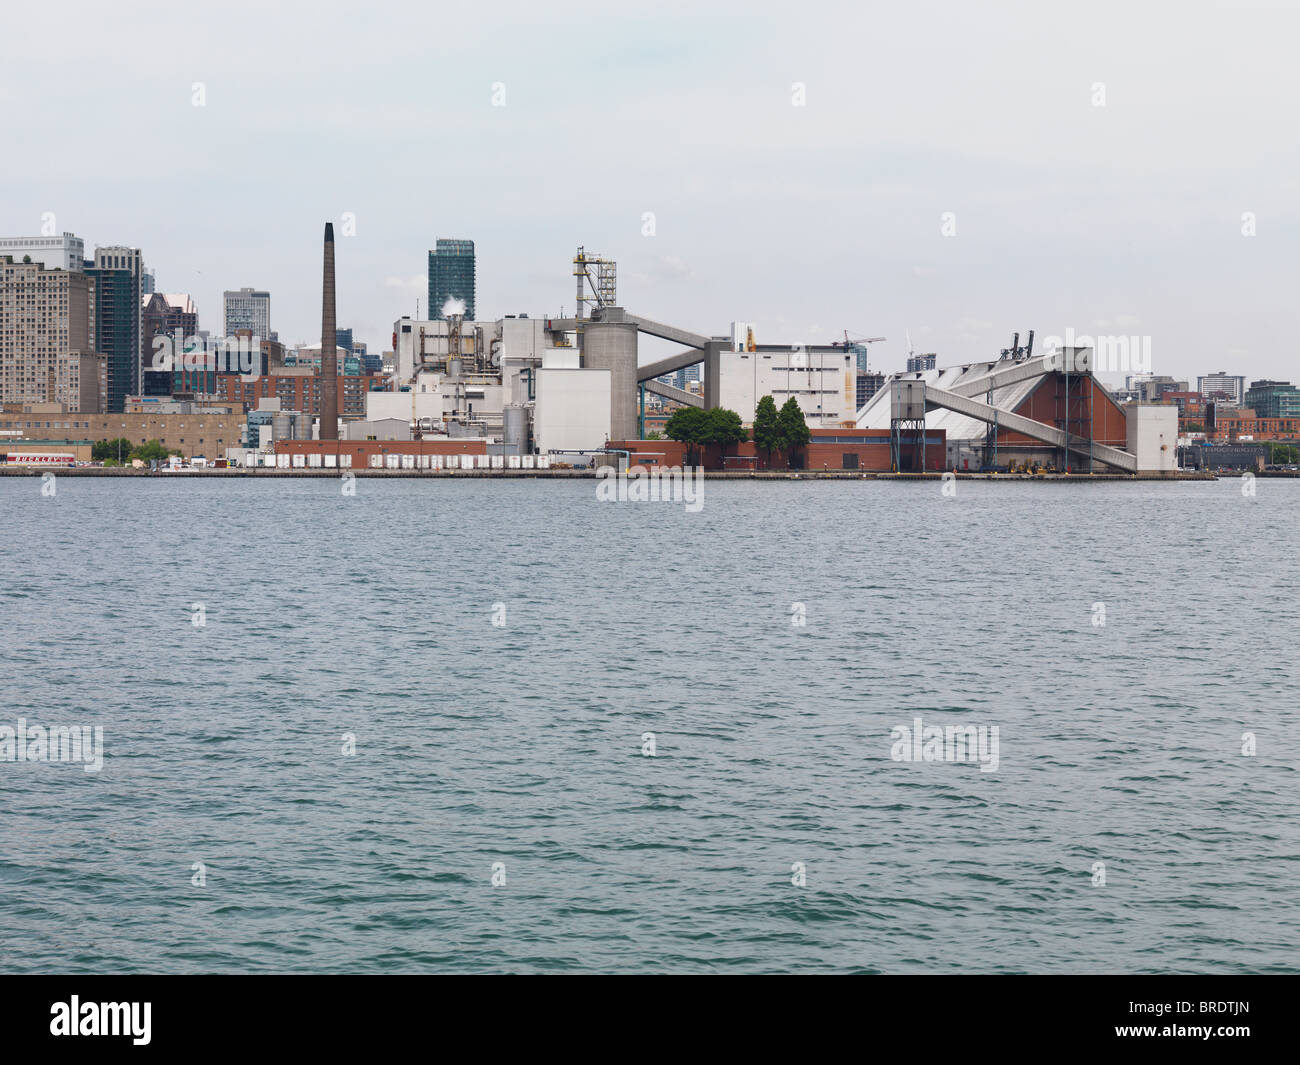 Redpath Sugar Refinery sugar processing plant at Harbourfront in Toronto, Ontario, Canada. Stock Photo